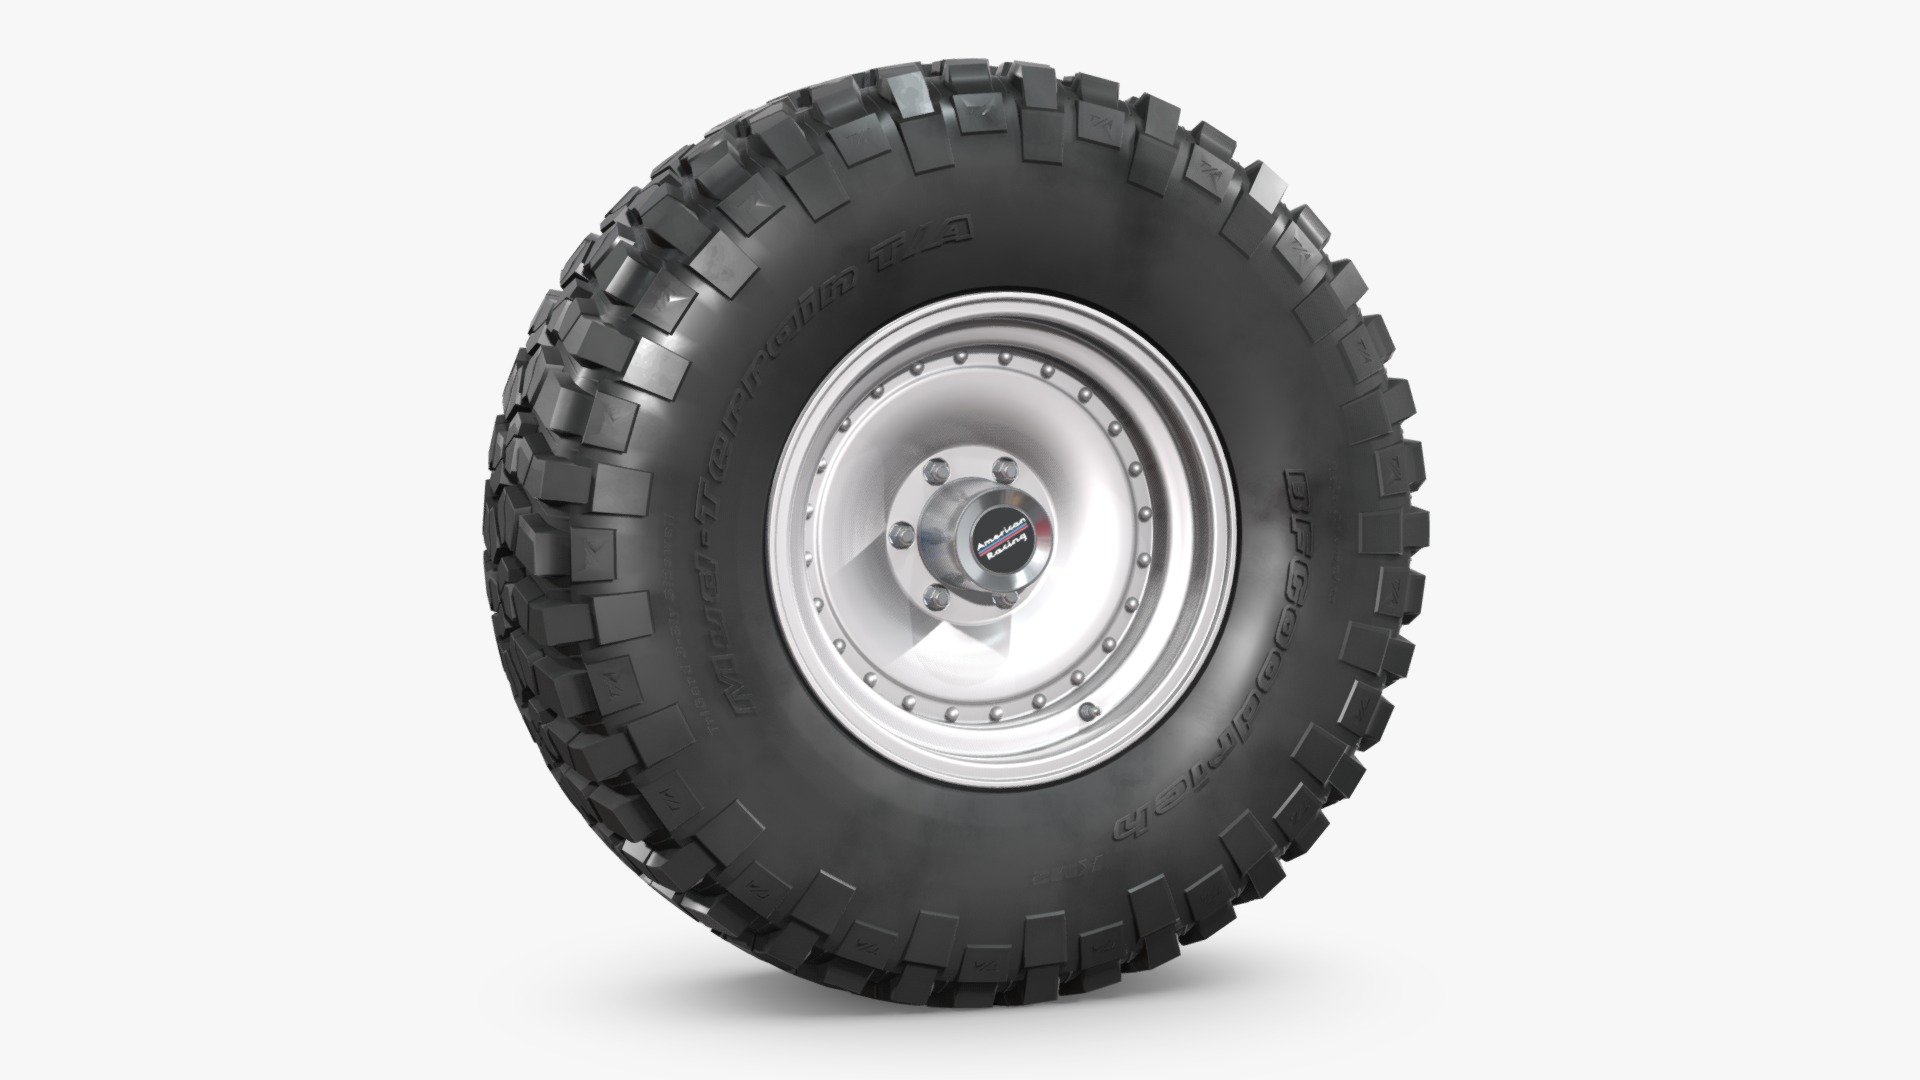 NN 3D store.

3D model of an off road wheel and tire combo.

The model is fully textured and was created with 3DS Max 2016 using the open subdivision modifier which has been left in the stack to adjust the level of detail.

There are also included a Blender format with textures.

Exchange files included: 3DS, FBX and OBJ.

SPECIFICATIONS:

The model has 70.000 polygons.

Scale/transform is set to 100%, units are set to centimeters, texture paths are stripped and and it is made to real world scale.

PRESENTATION:

Product is ready to render out of the box only in 3DSMax.

Lights and cameras are not included.

MATERIALS AND TEXTURES:

All textures are included and mapped in all files but they will render like the preview images only in 3DSMax with V-Ray, the rest of the files might have to be adjusted depending on the software you are using.

JPG textures have 2048 x 2048 resolution 3d model